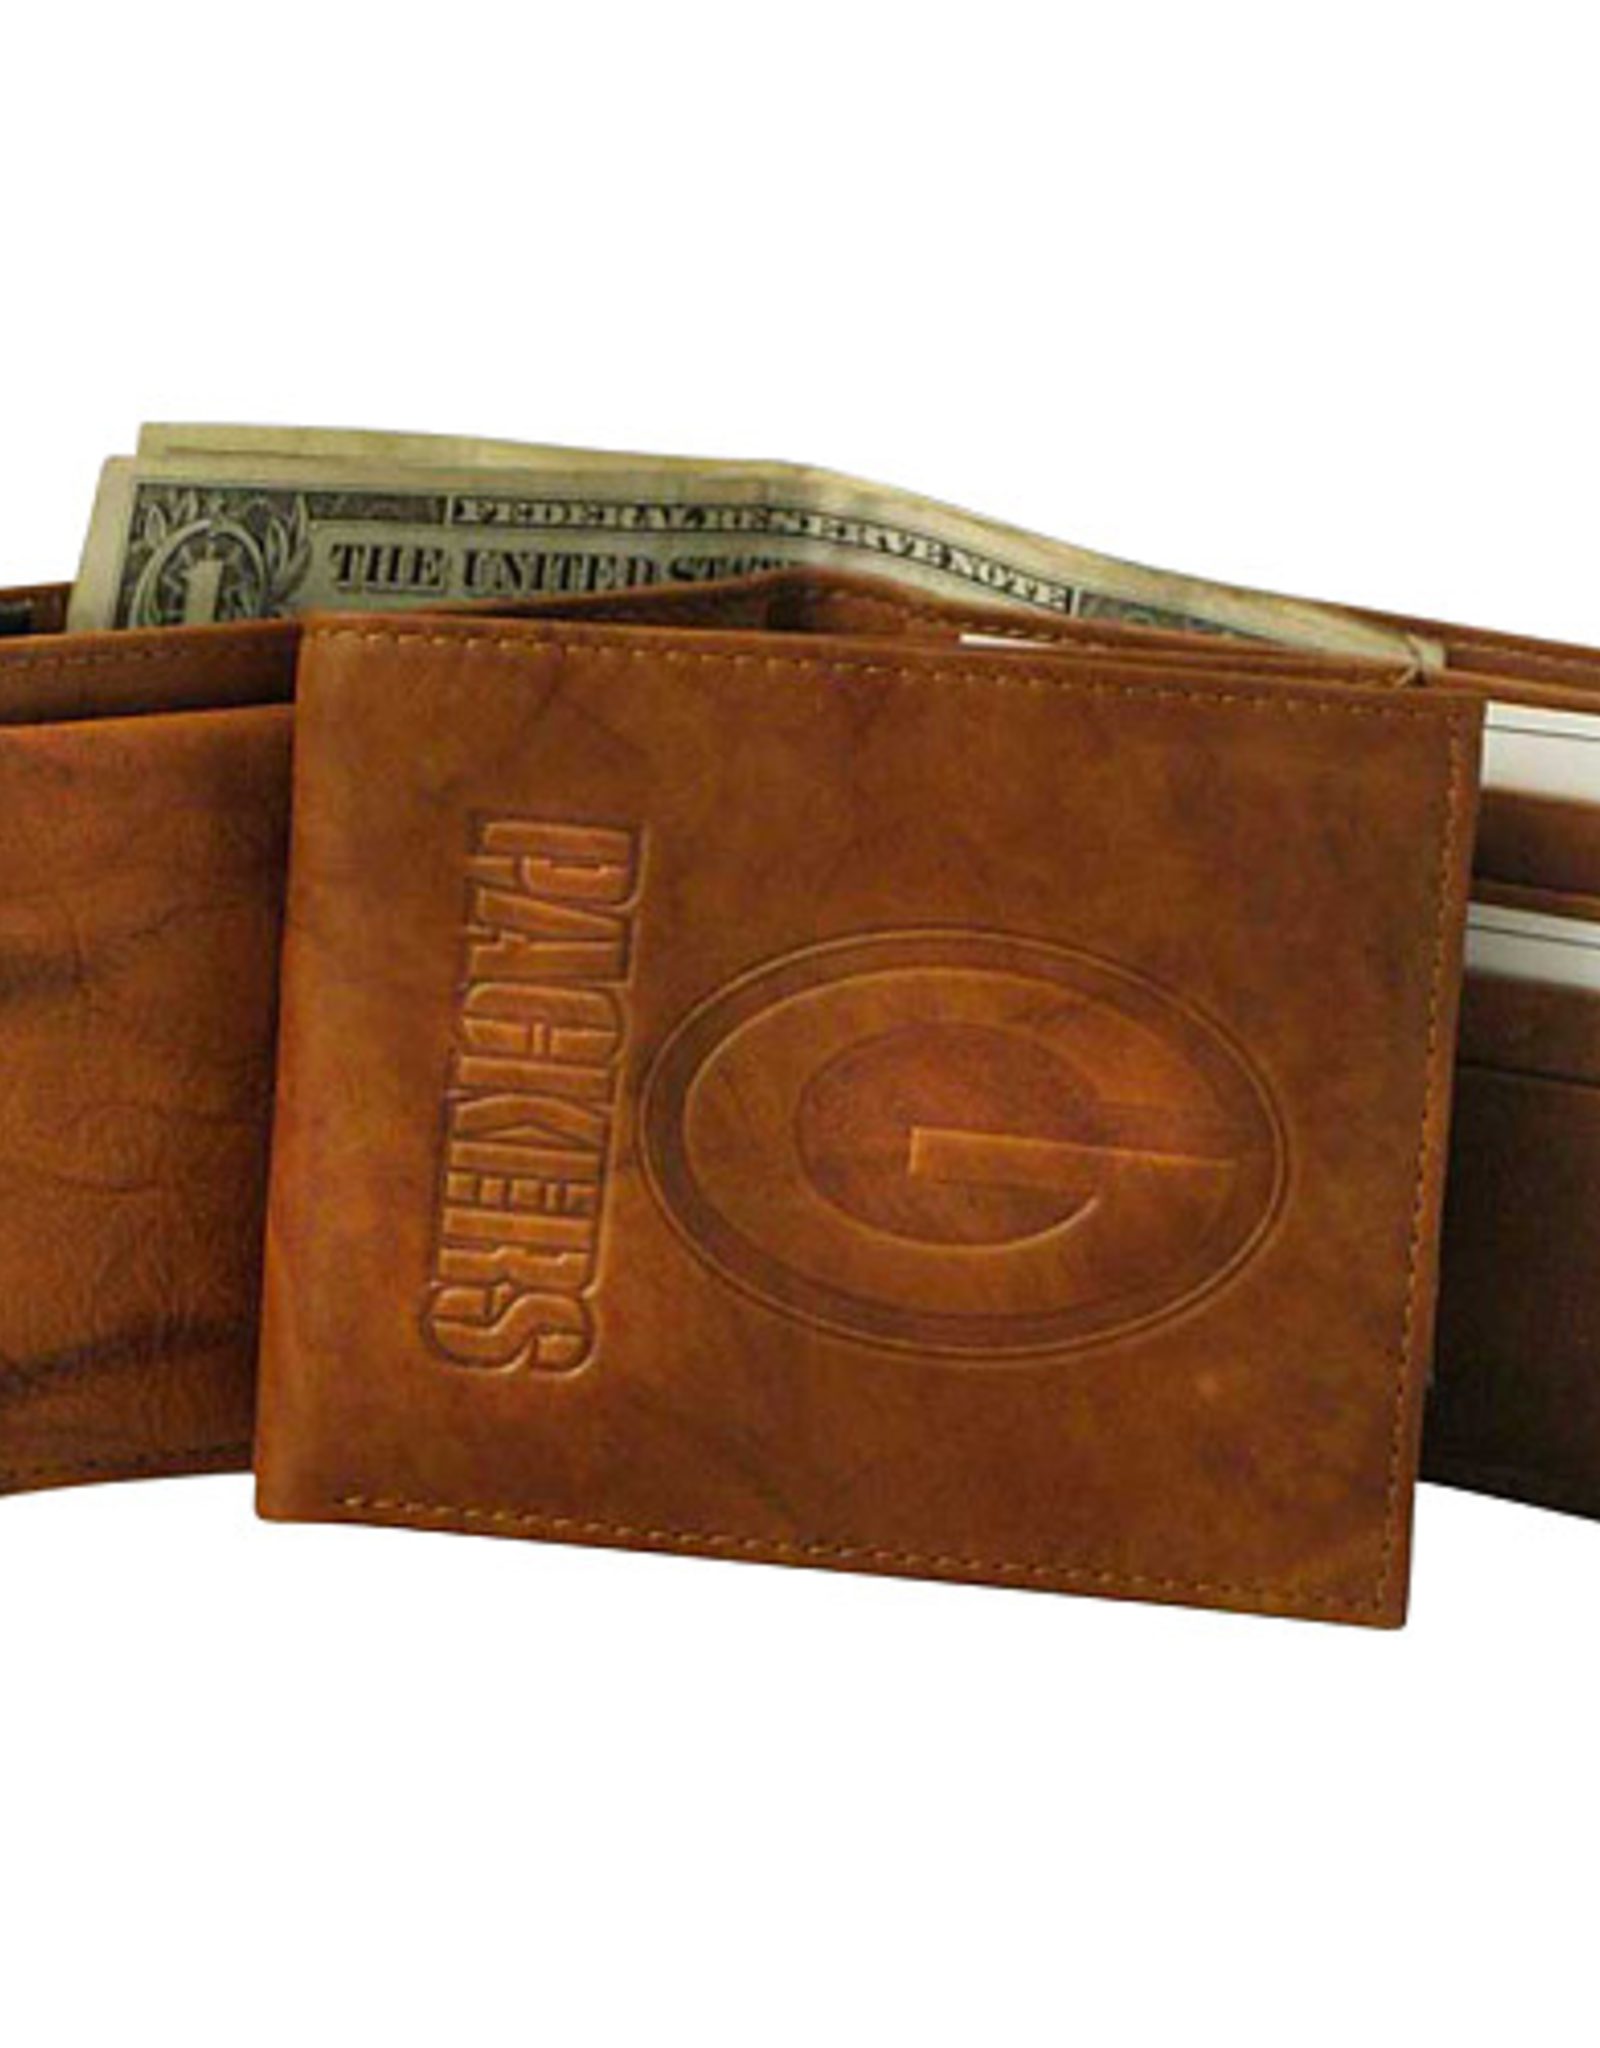 RICO INDUSTRIES Green Bay Packers Vintage Leather Billfold Wallet